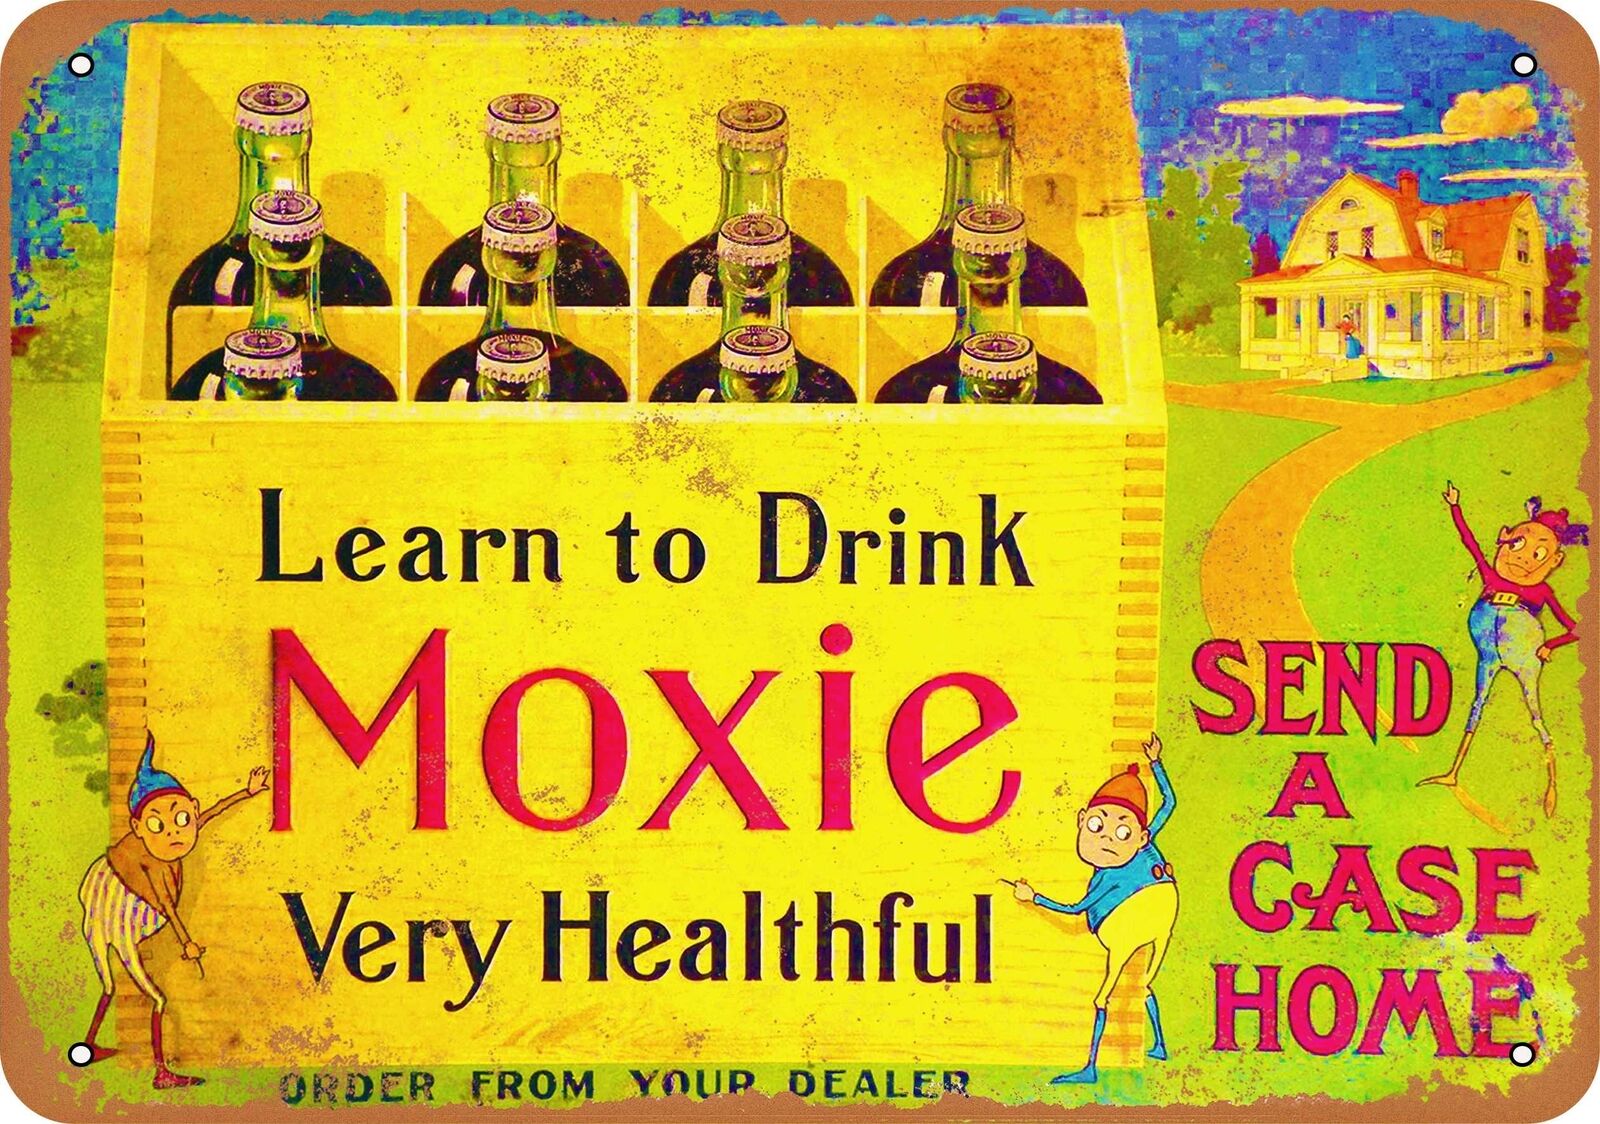 Metal Sign - Learn to Drink Moxie - Vintage Look Reproduction